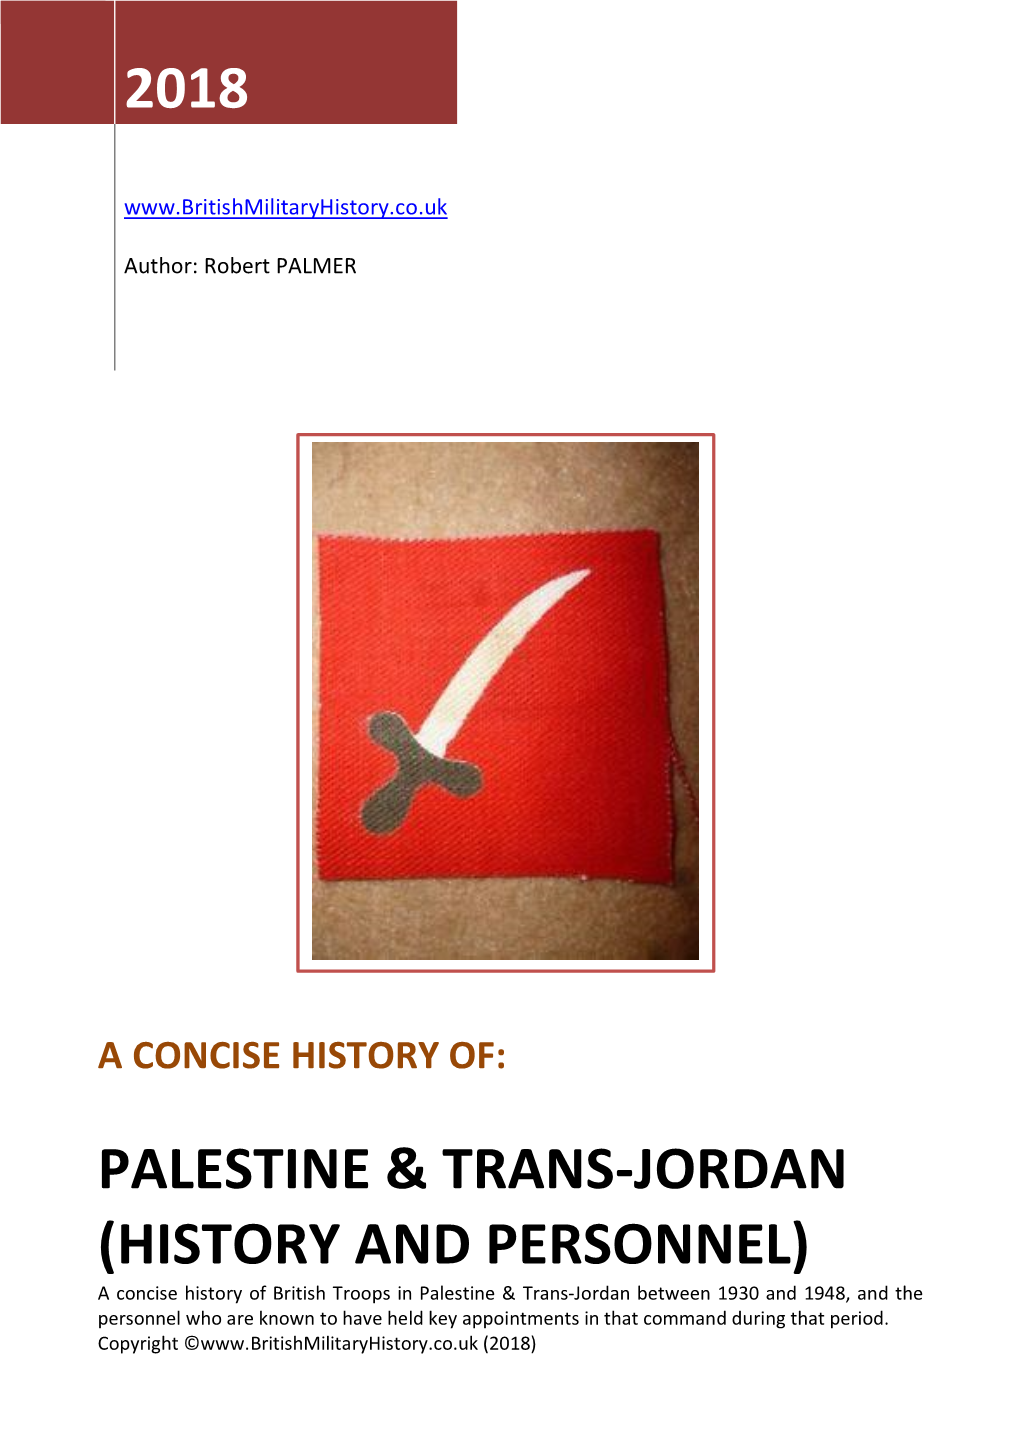 Palestine and Trans-Jordan History and Personnel